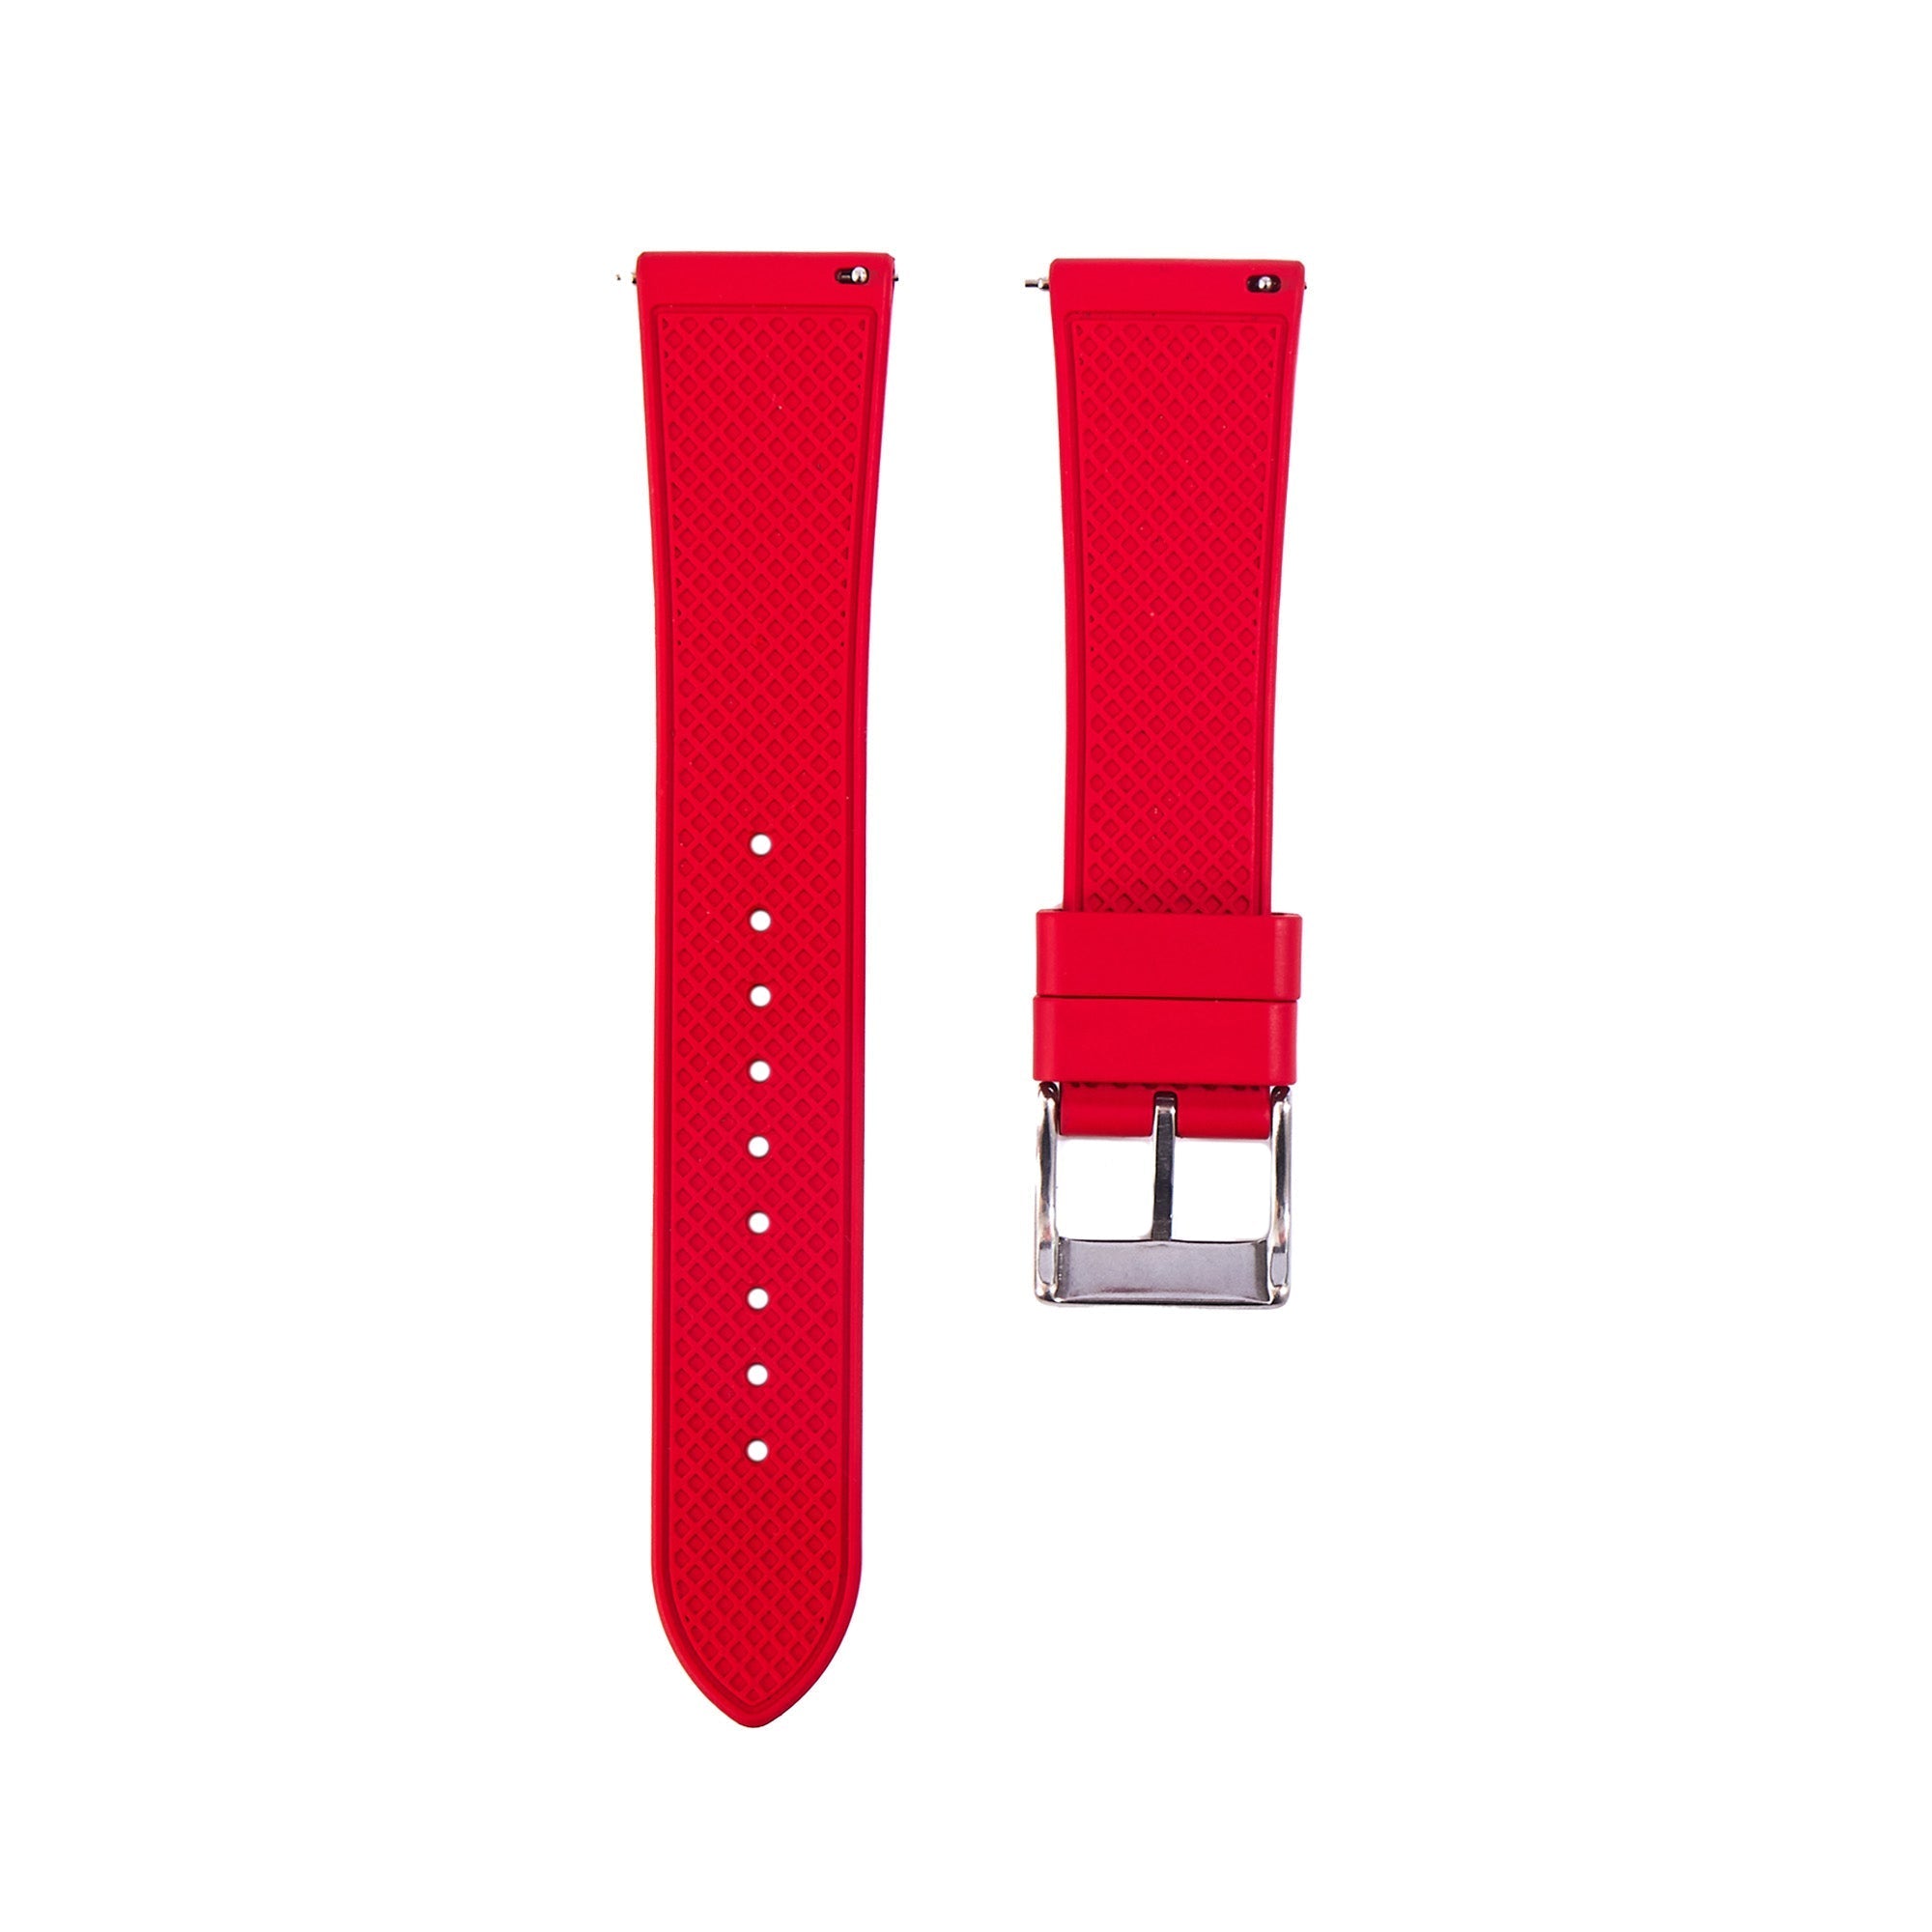 Grid FKM Rubber Strap - Quick-Release - Compatible with Blancpain x Swatch - Bright Red (2412) -StrapSeeker